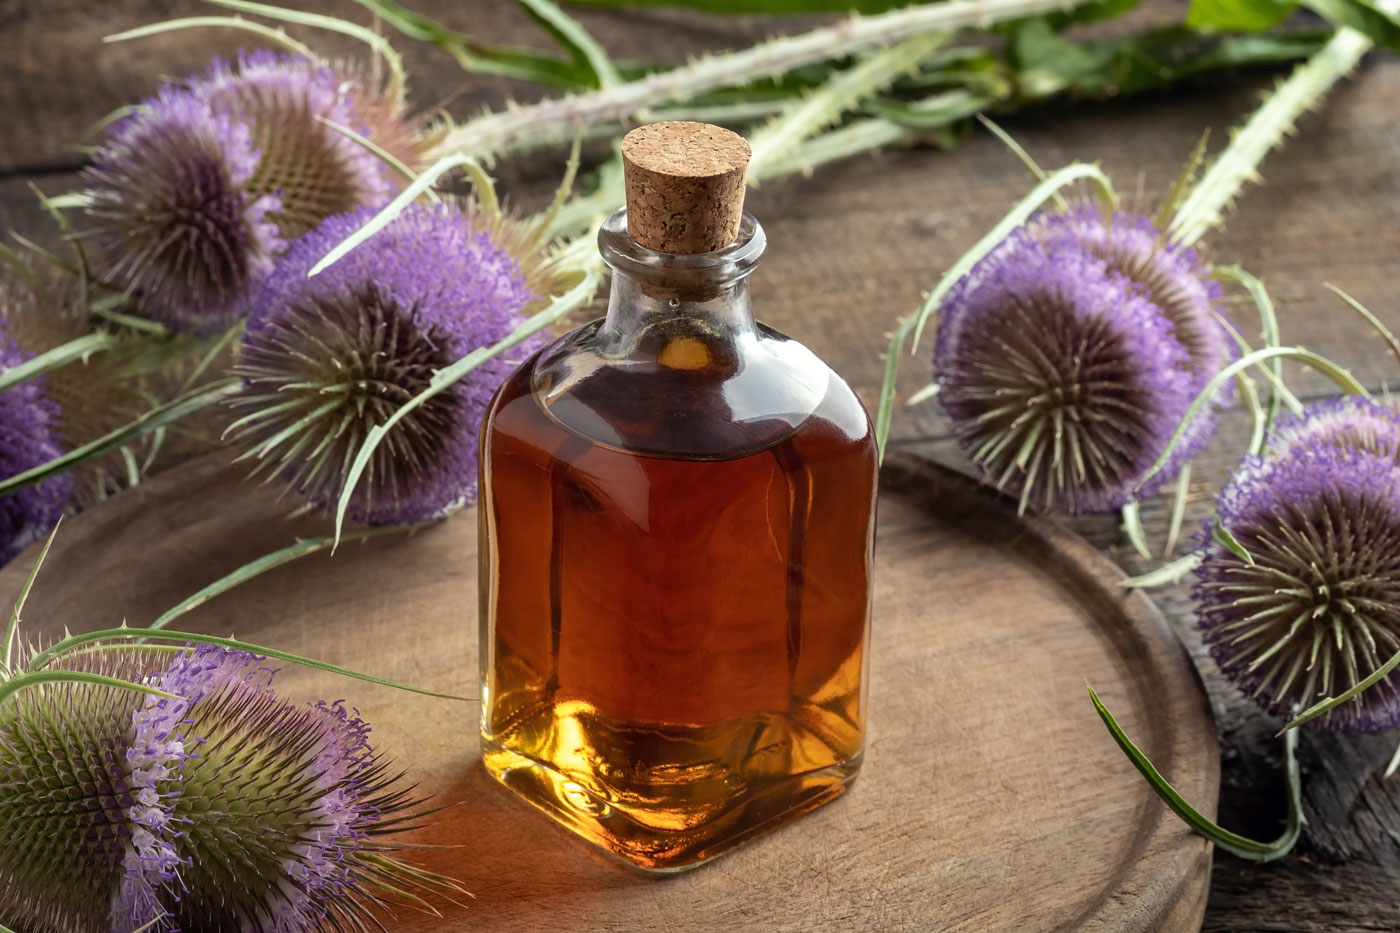 tincture in a bottle with wild teasel flowers